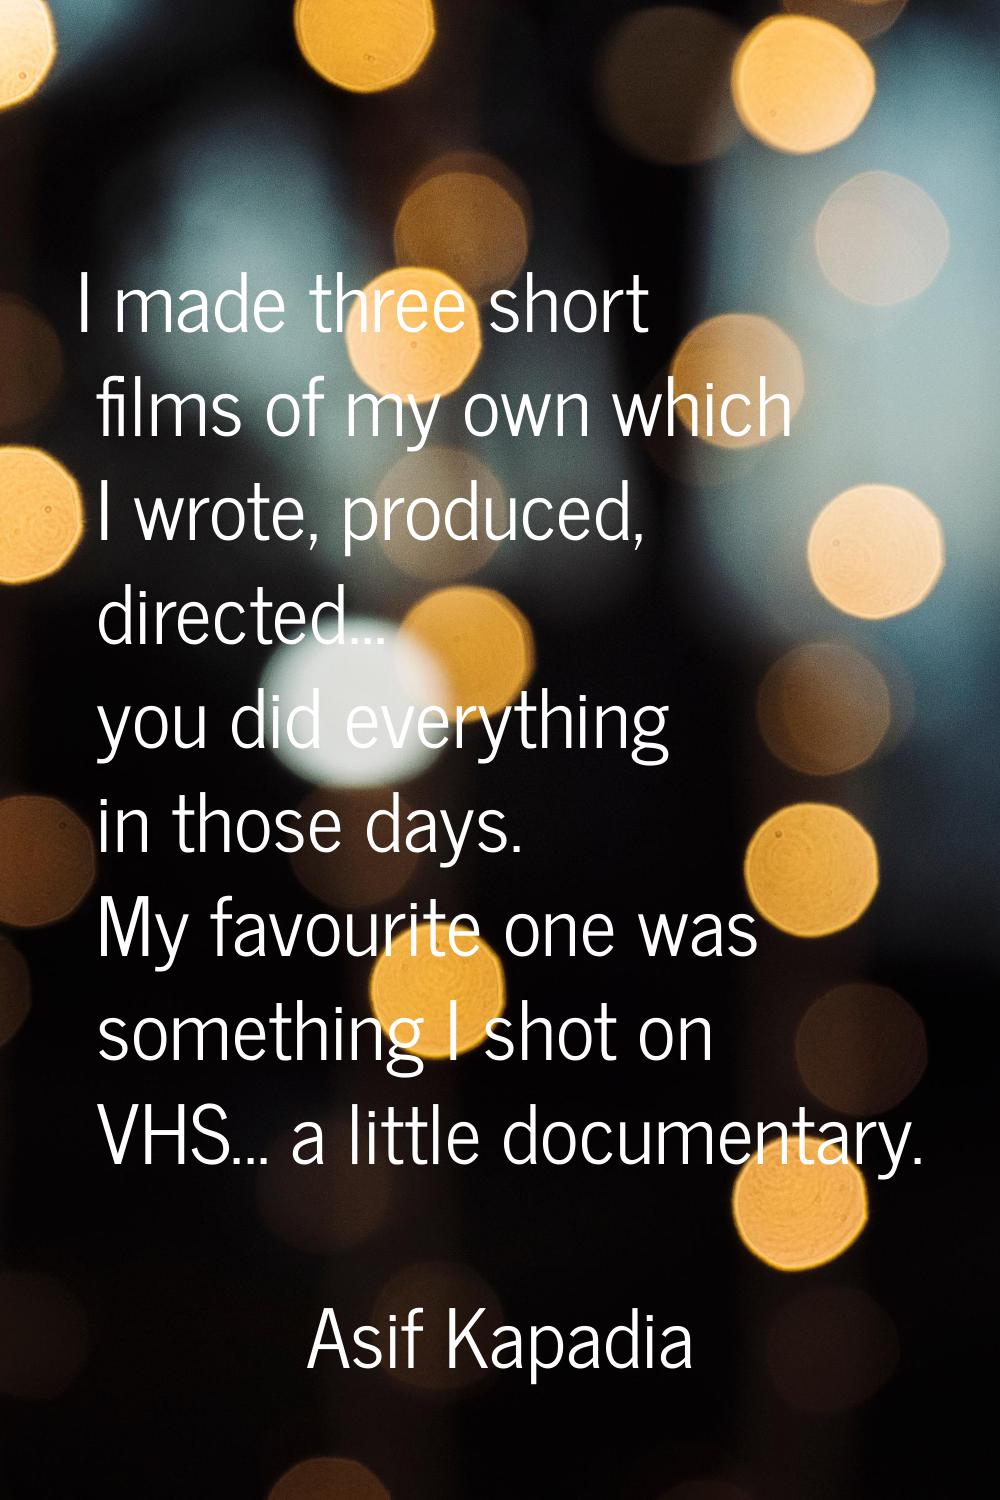 I made three short films of my own which I wrote, produced, directed... you did everything in those